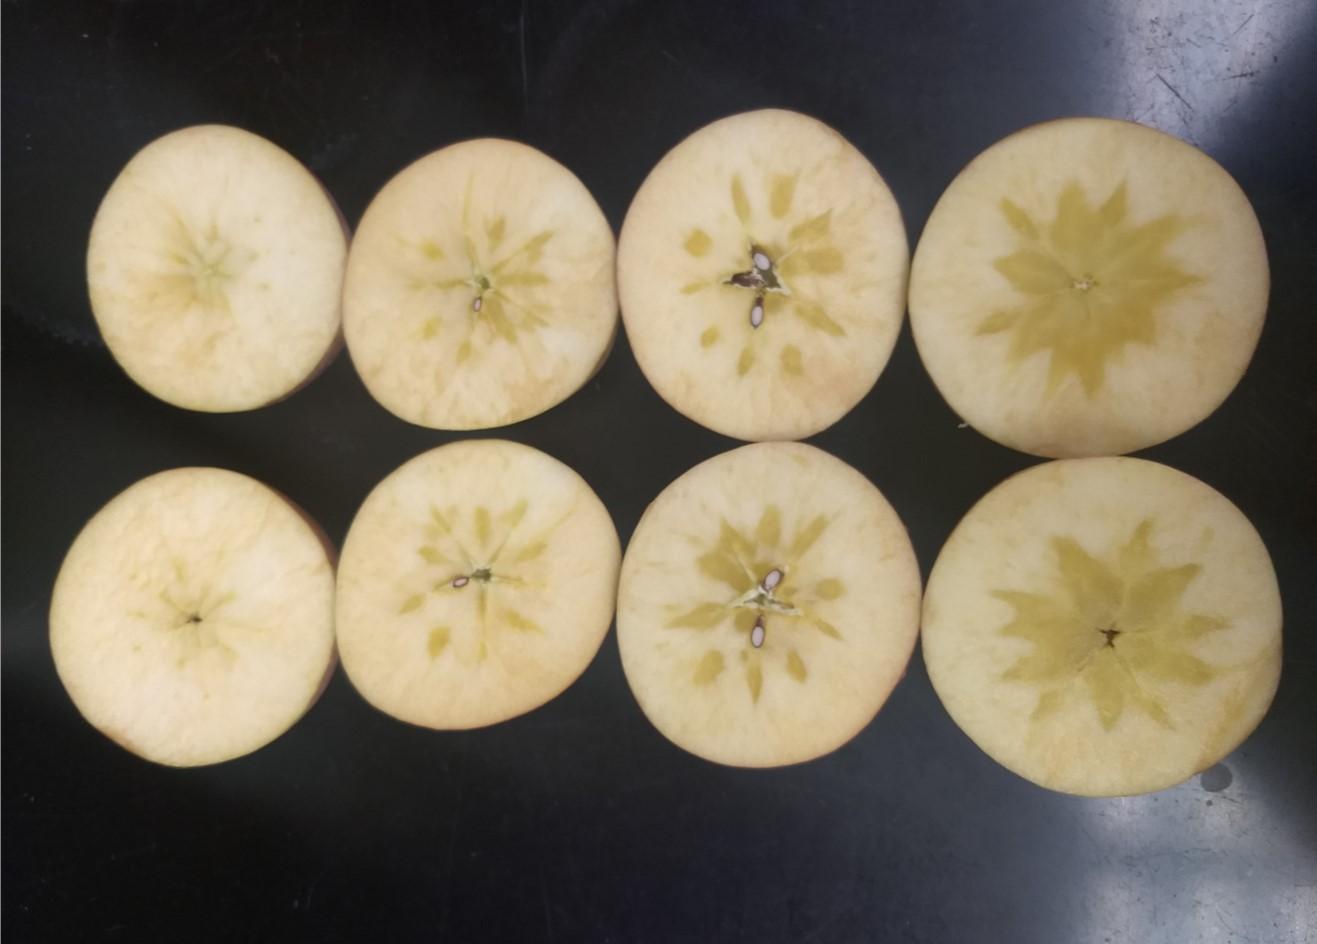 Apples with water core from mild to severe